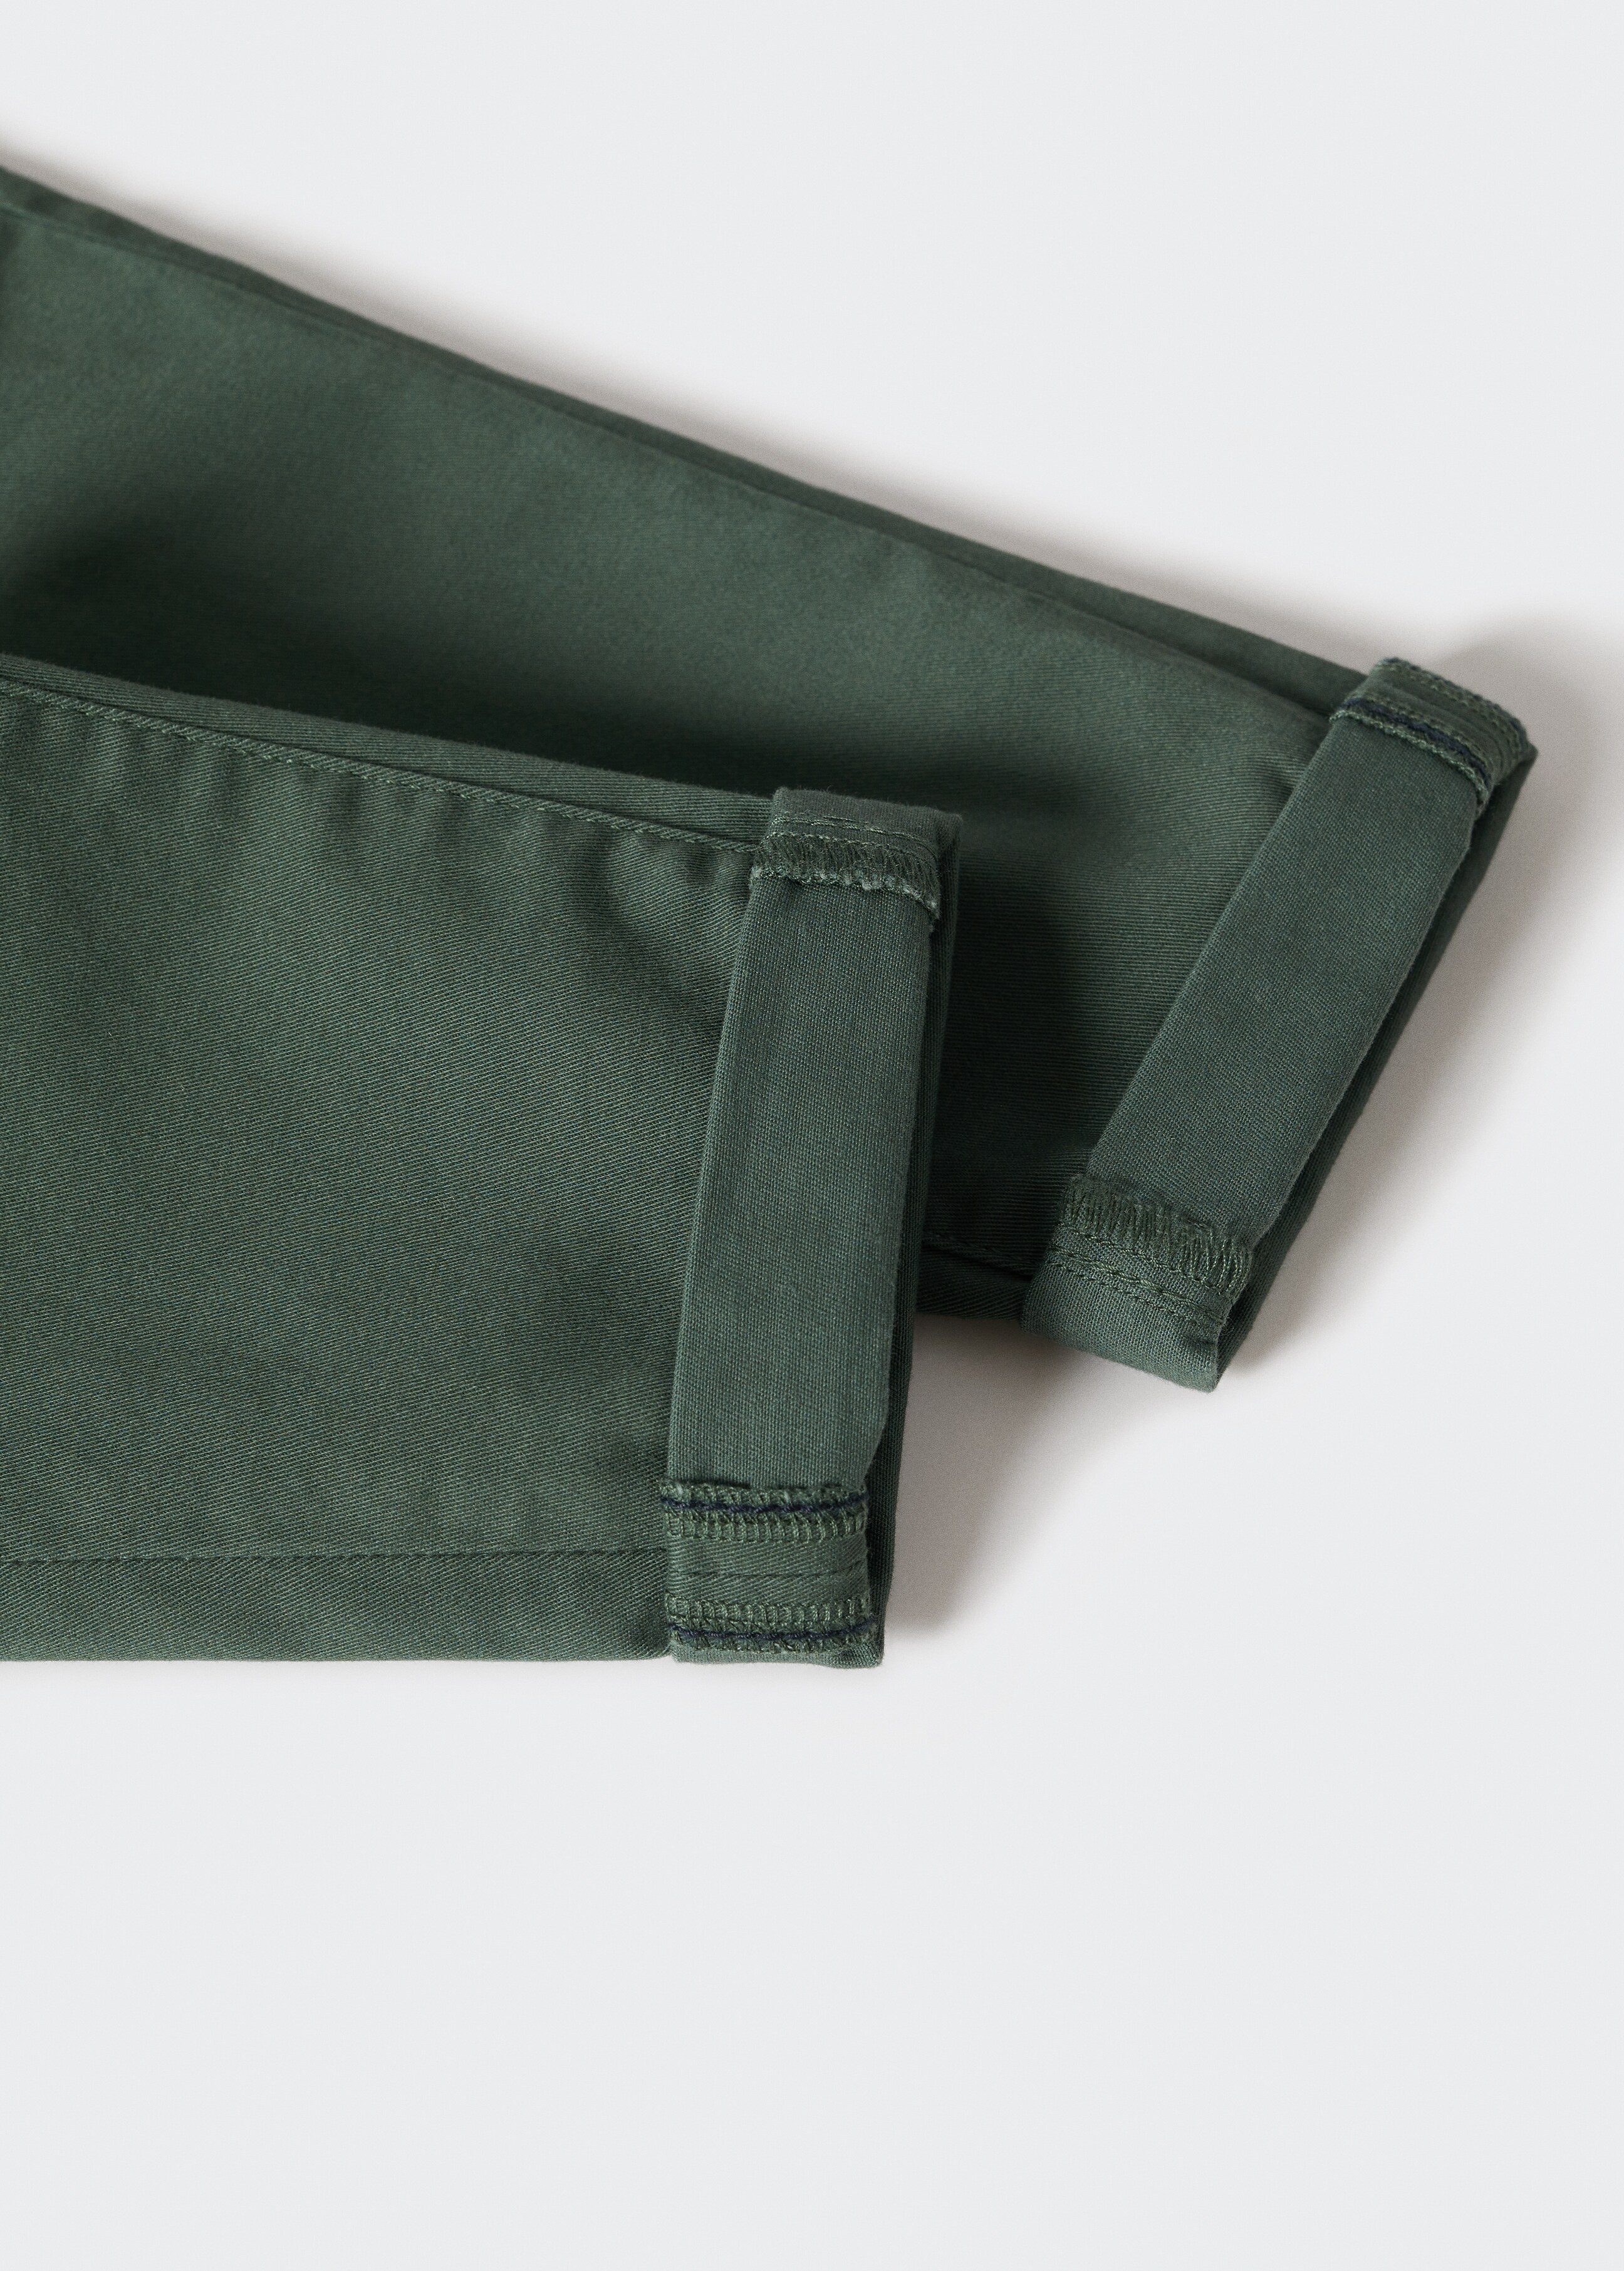 Stretchy chinos - Details of the article 9